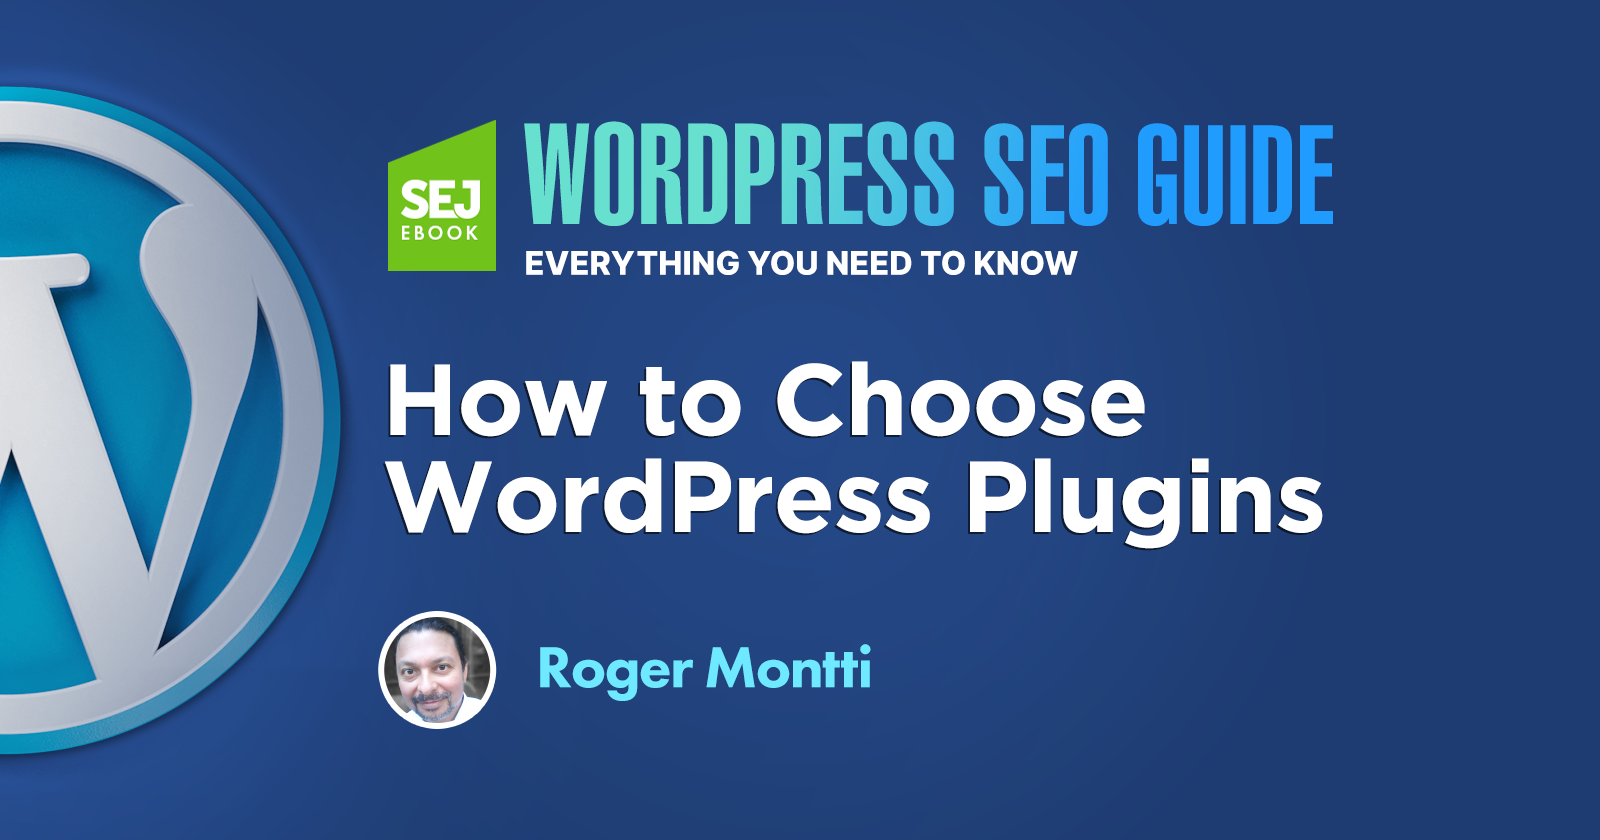 chapter 6 609e328118718 How to Choose WordPress Plugins 1